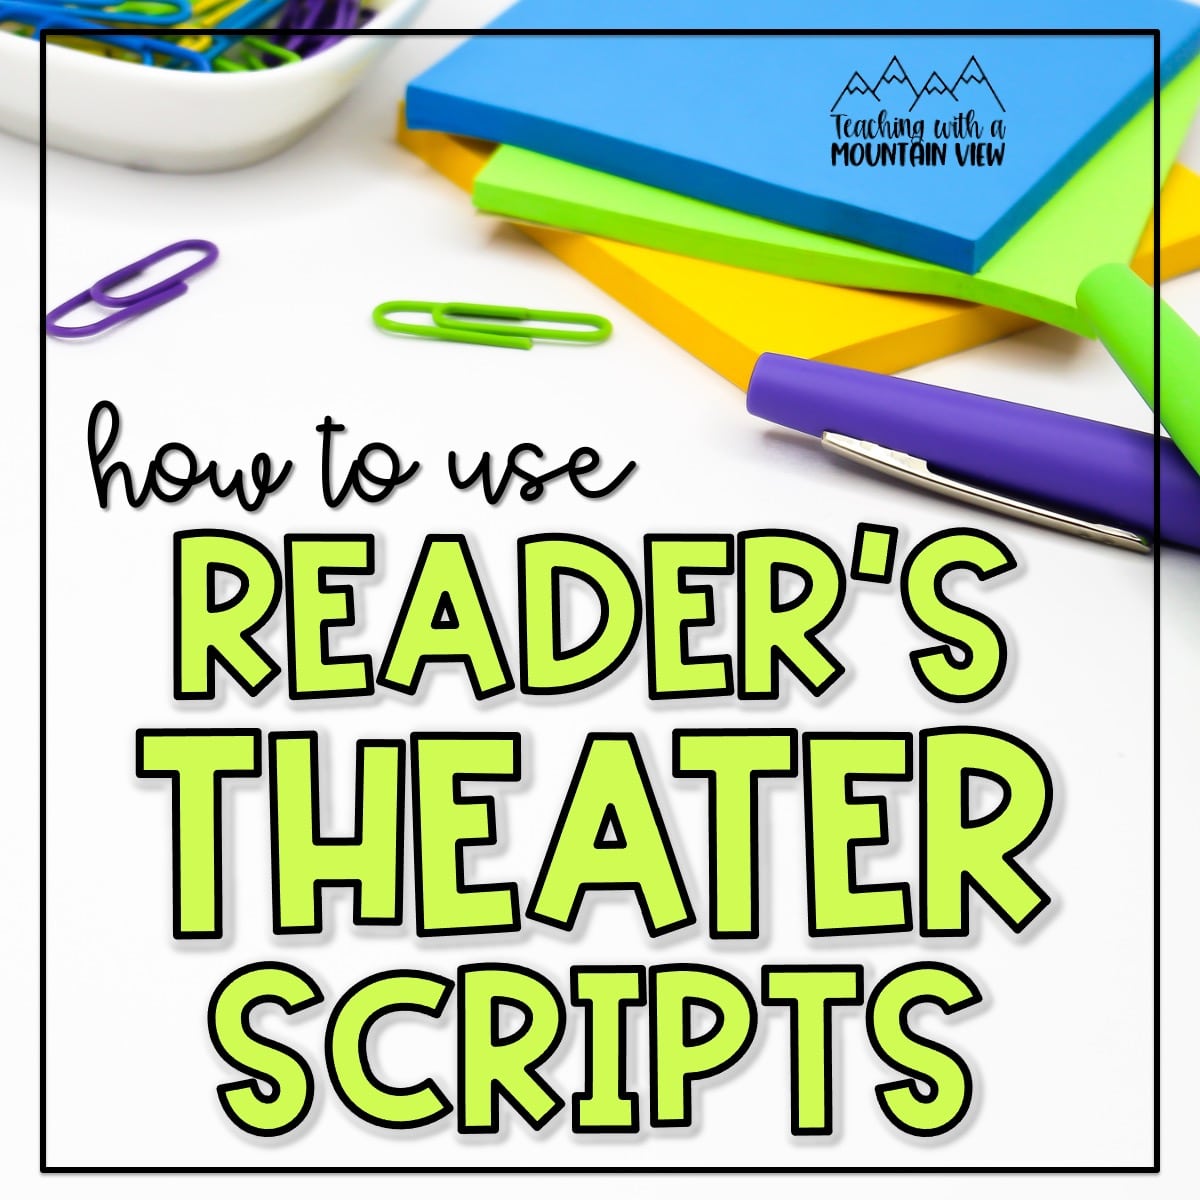 Learn how to use reader’s theater scripts in your upper elementary classroom and tips for getting started if you’re brand new to it.